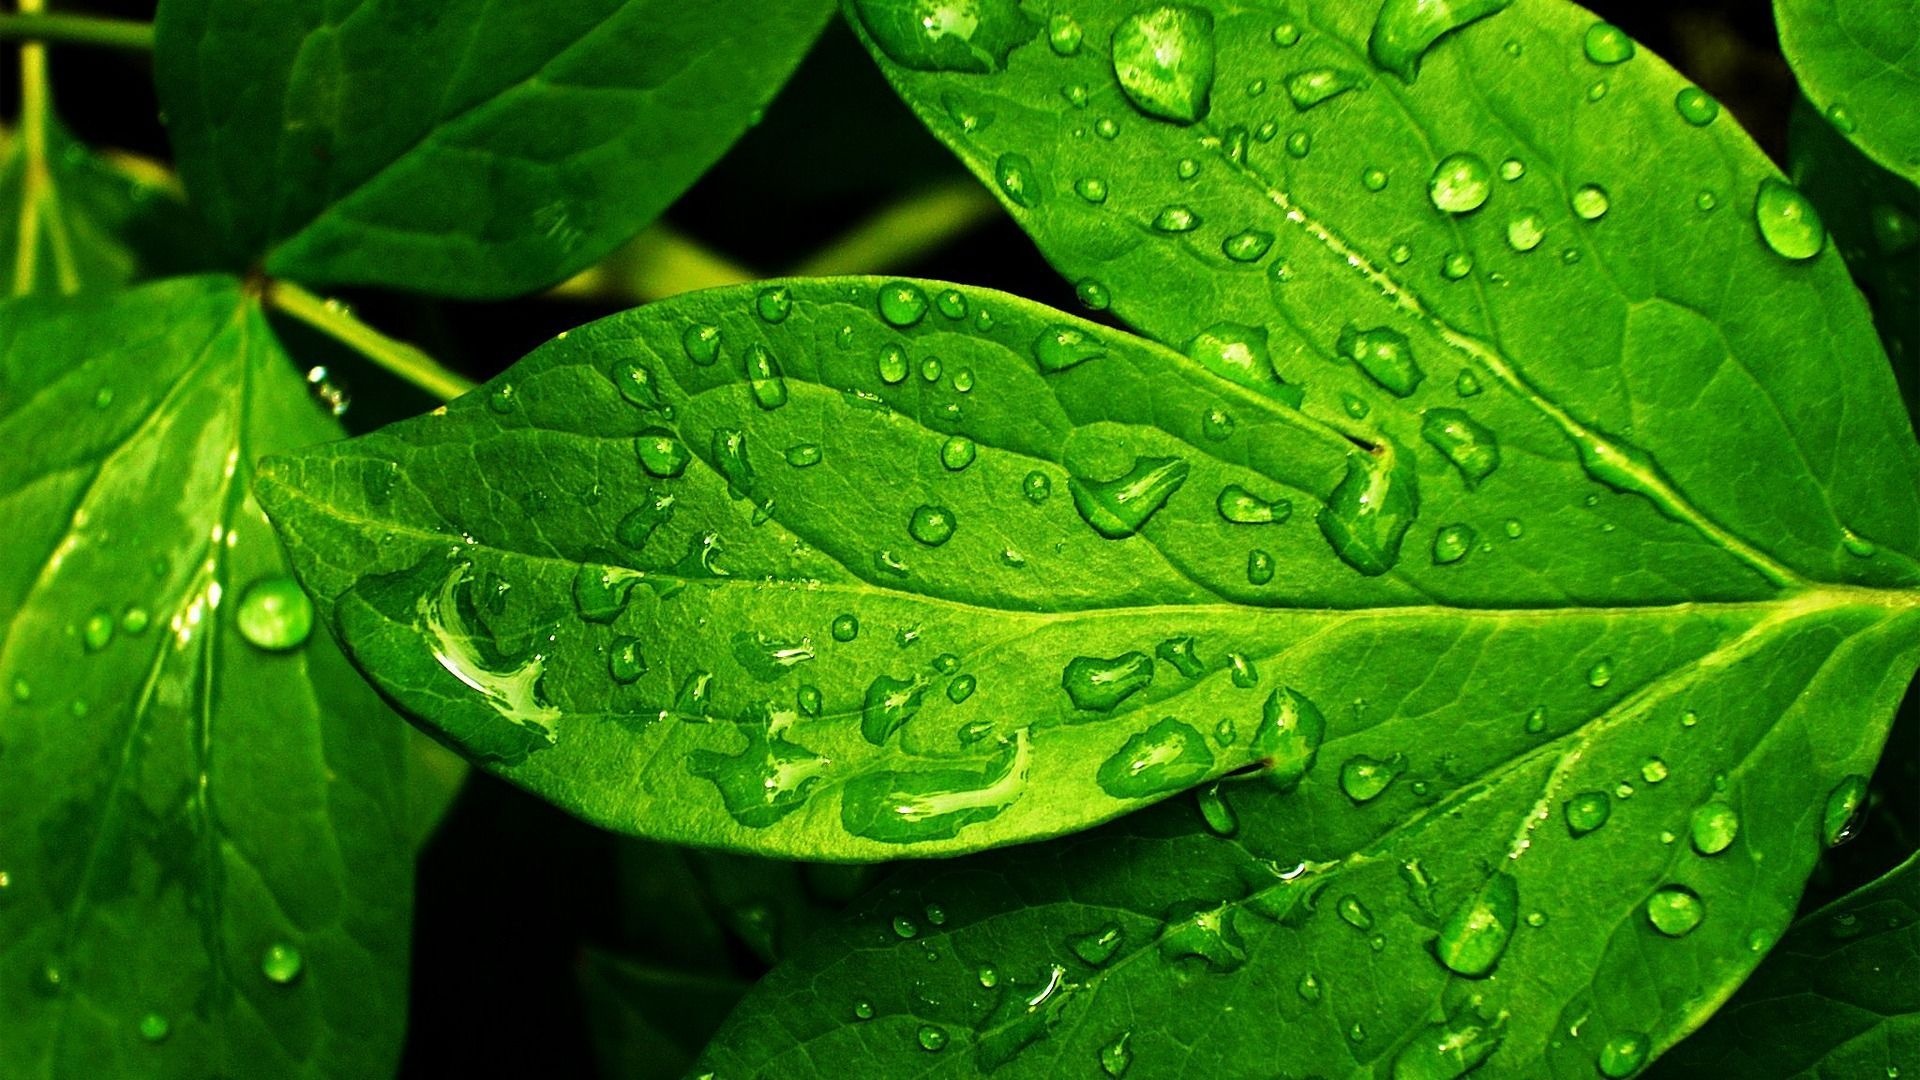 Green Leaf: Leaves of a type of chestnut, Native to temperate regions of the Northern Hemisphere, Dew water. 1920x1080 Full HD Wallpaper.